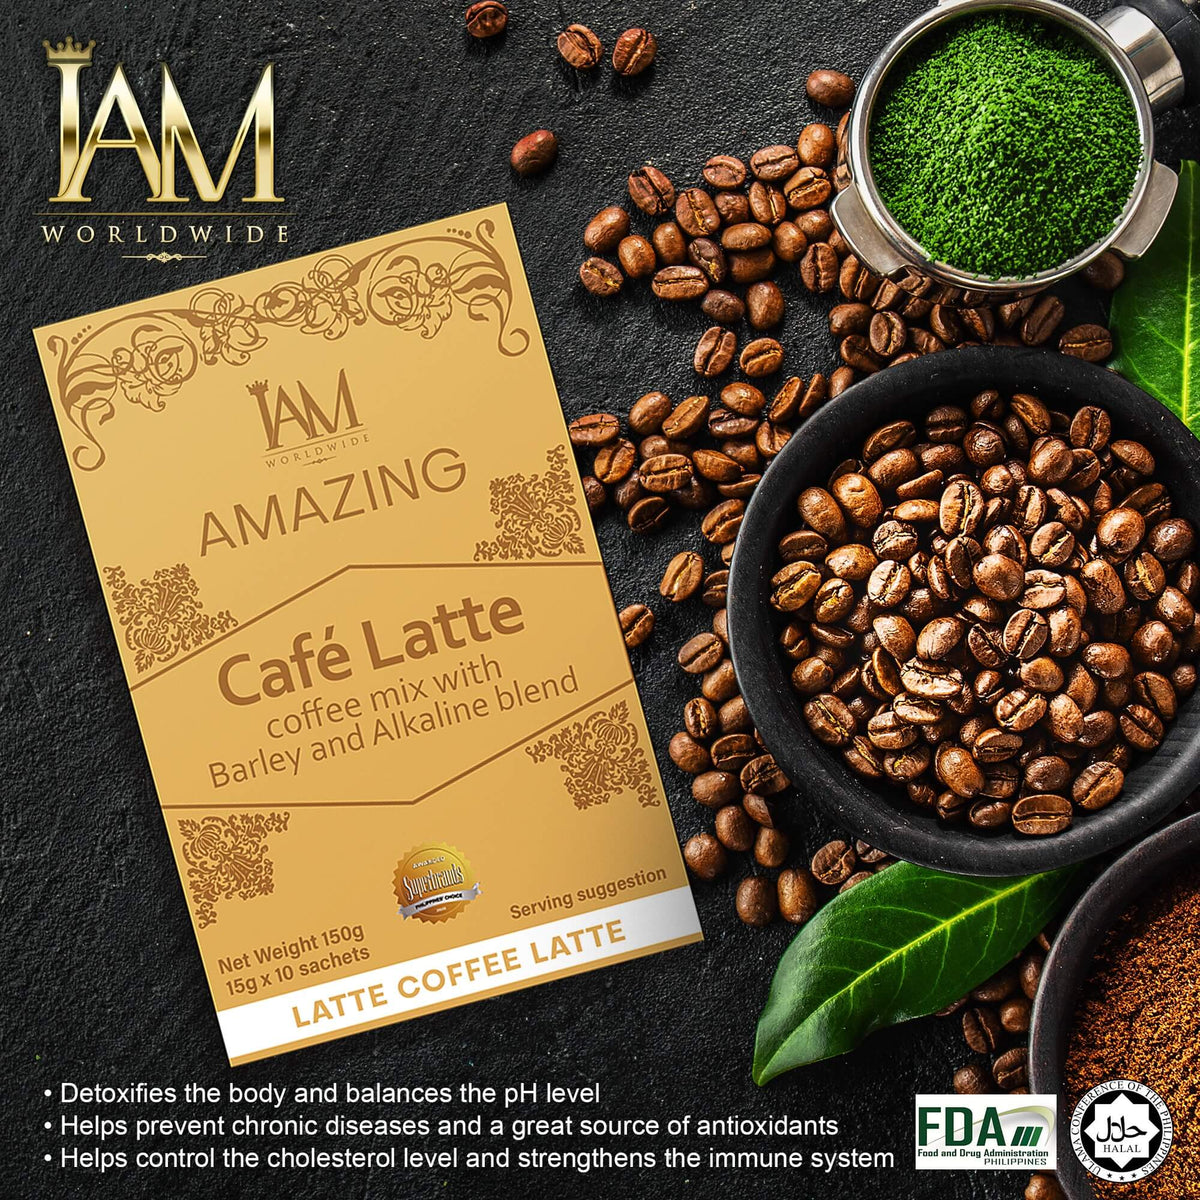 Amazing Café Latte with Barley and Alkaline – IAM Worldwide Online Store PH